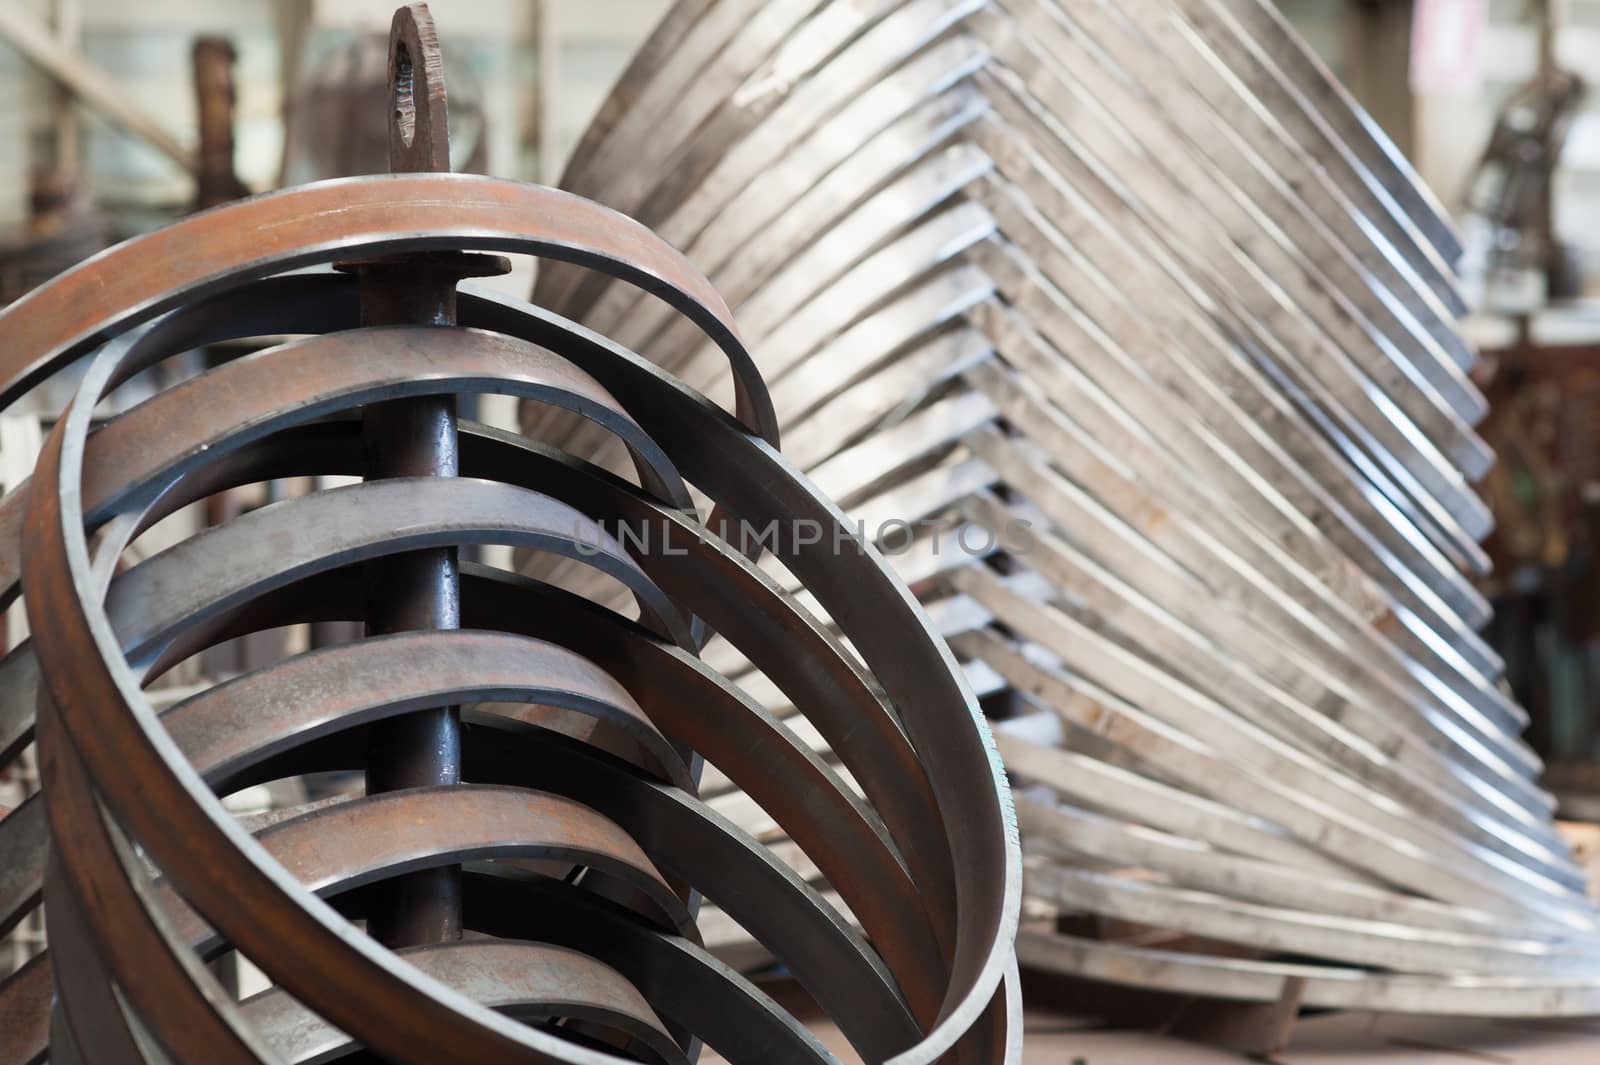 Conventional mild steel rings in the foreground and stainless steel rings in the background at industrial workshop. Shallow depth of field with part of the foreground rings in focus.